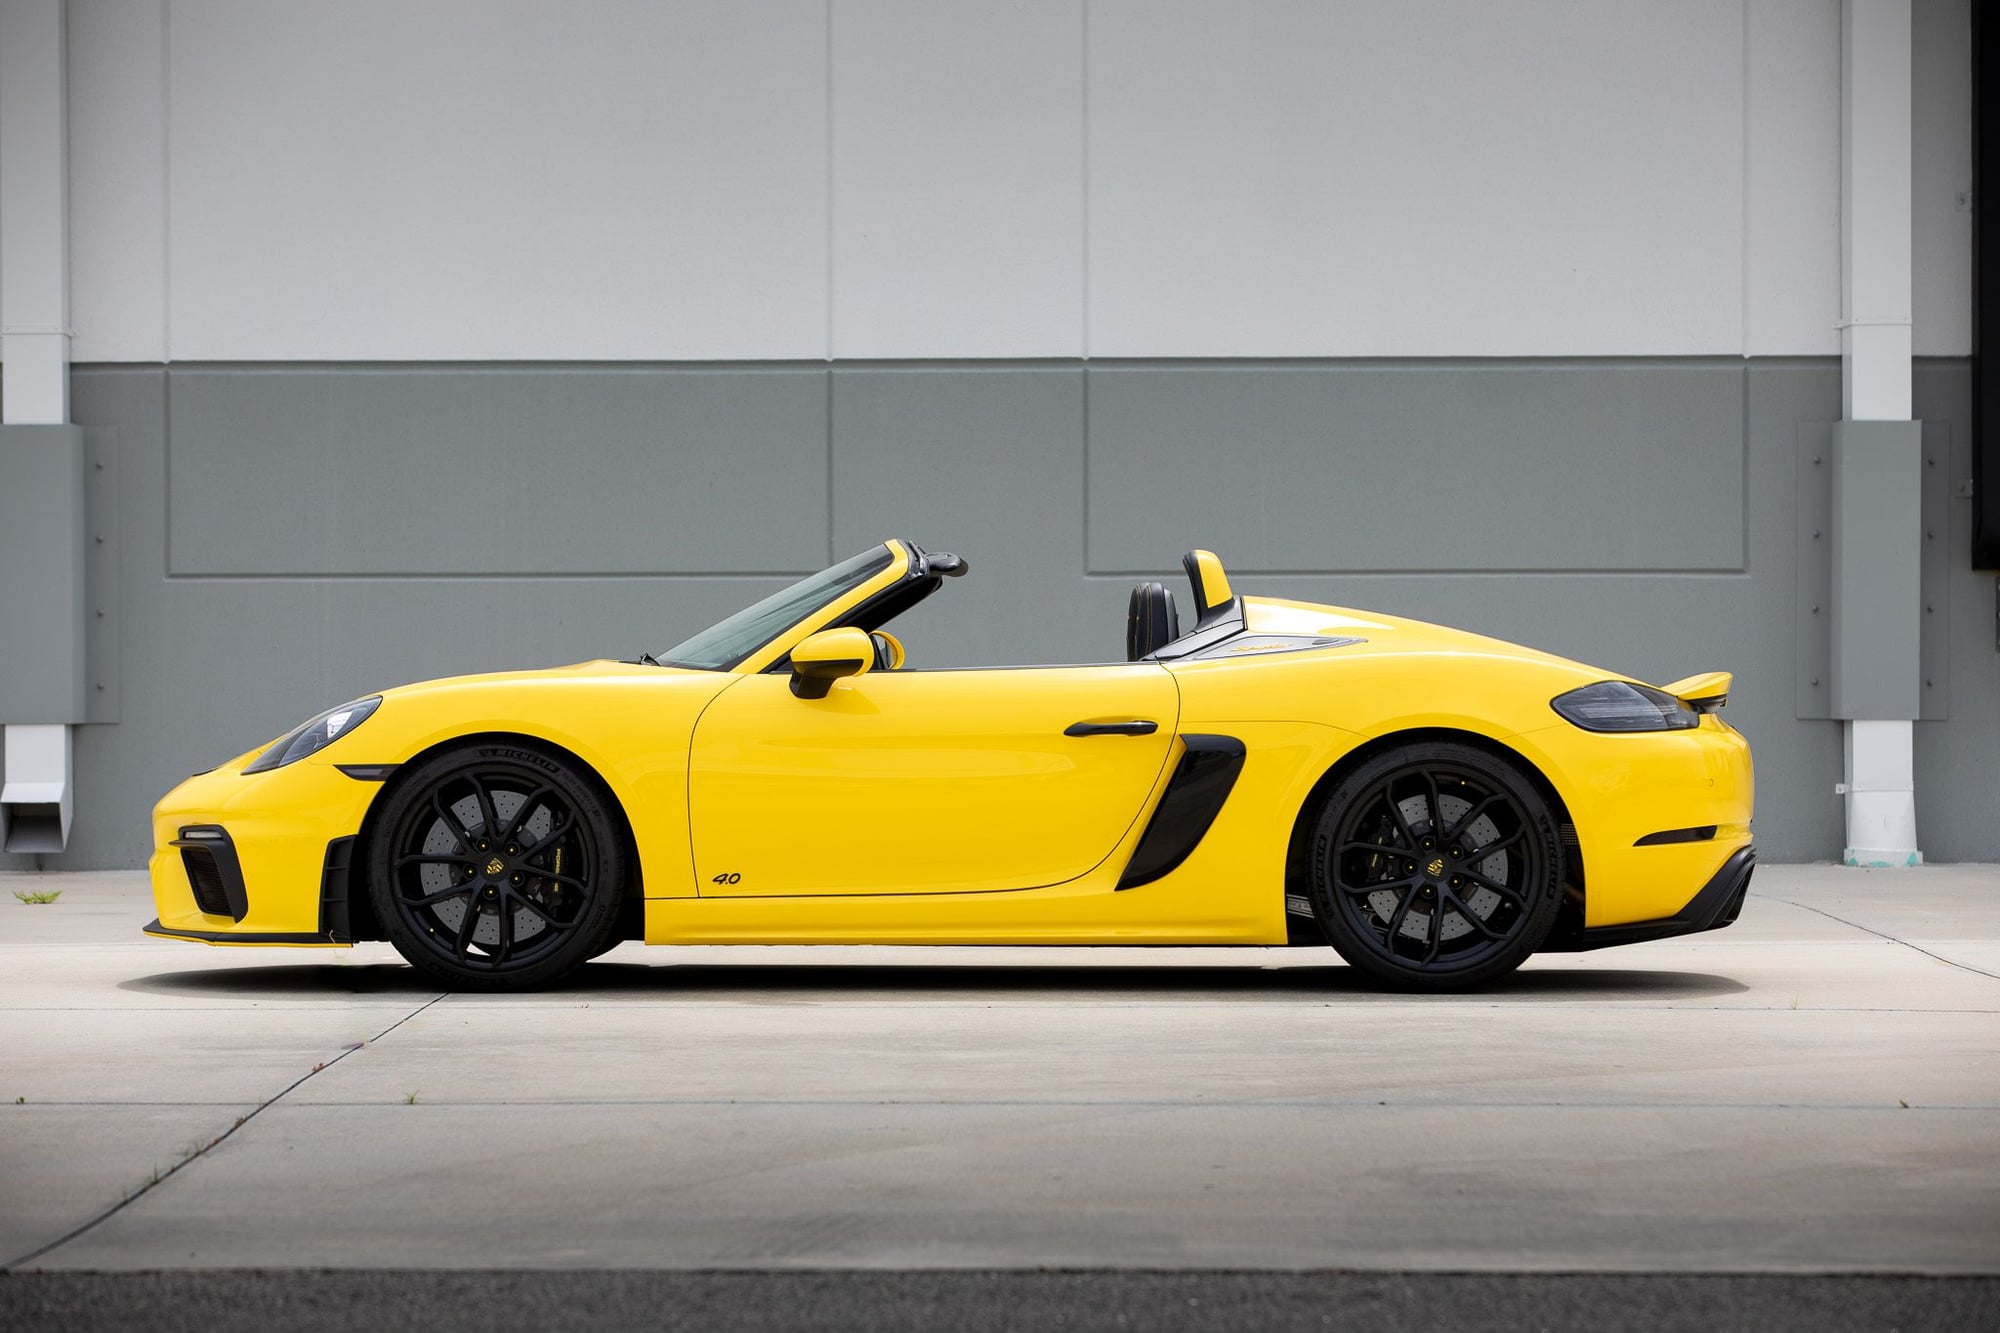 2021 Porsche 718 Spyder - 2021 718 Spyder - Used - VIN WP0CC2A84MS240814 - 7,857 Miles - 6 cyl - 2WD - Manual - Convertible - Yellow - Palm Coast, FL 32137, United States